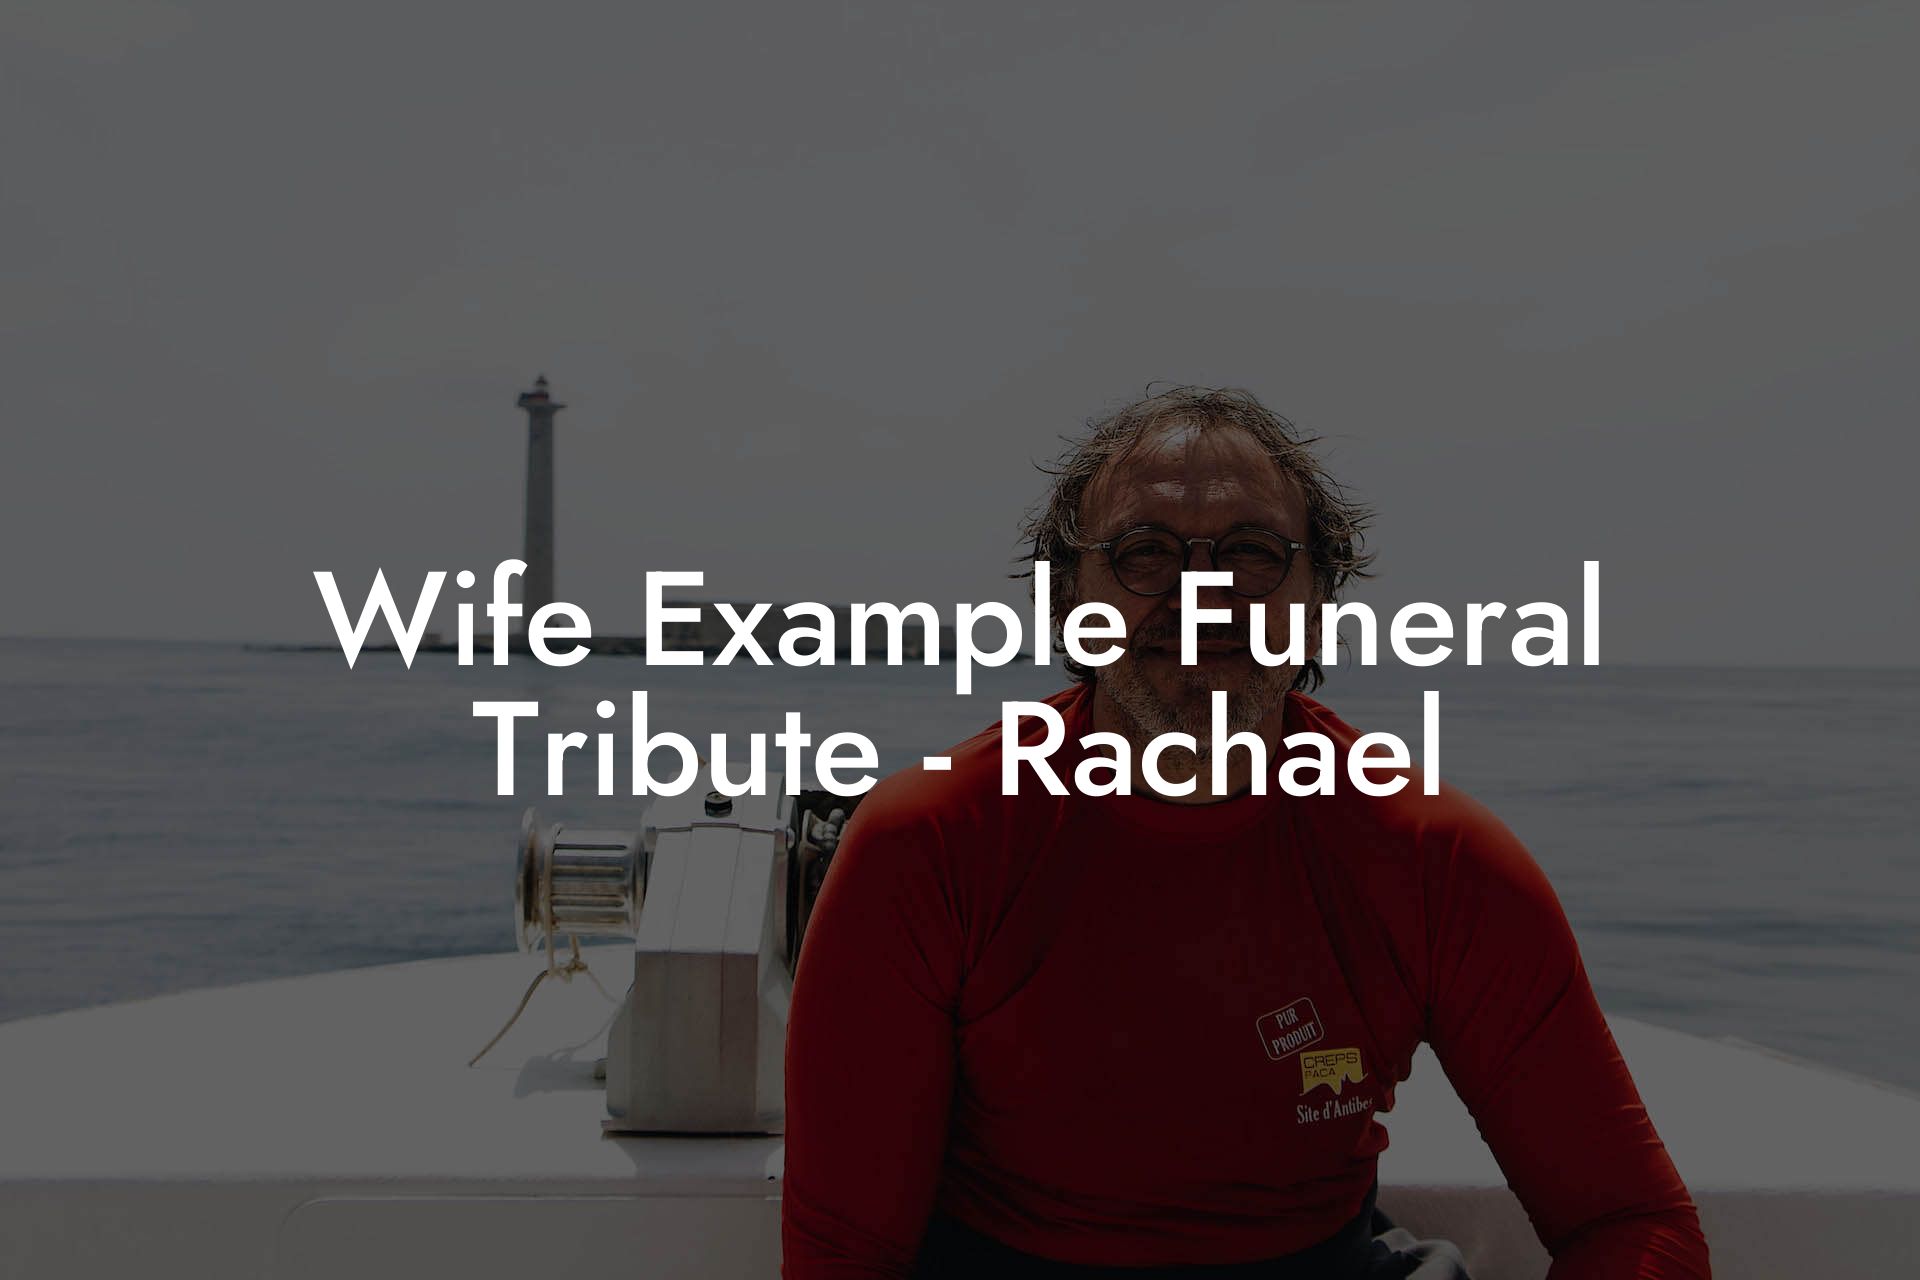 Wife Example Funeral Tribute - Rachael